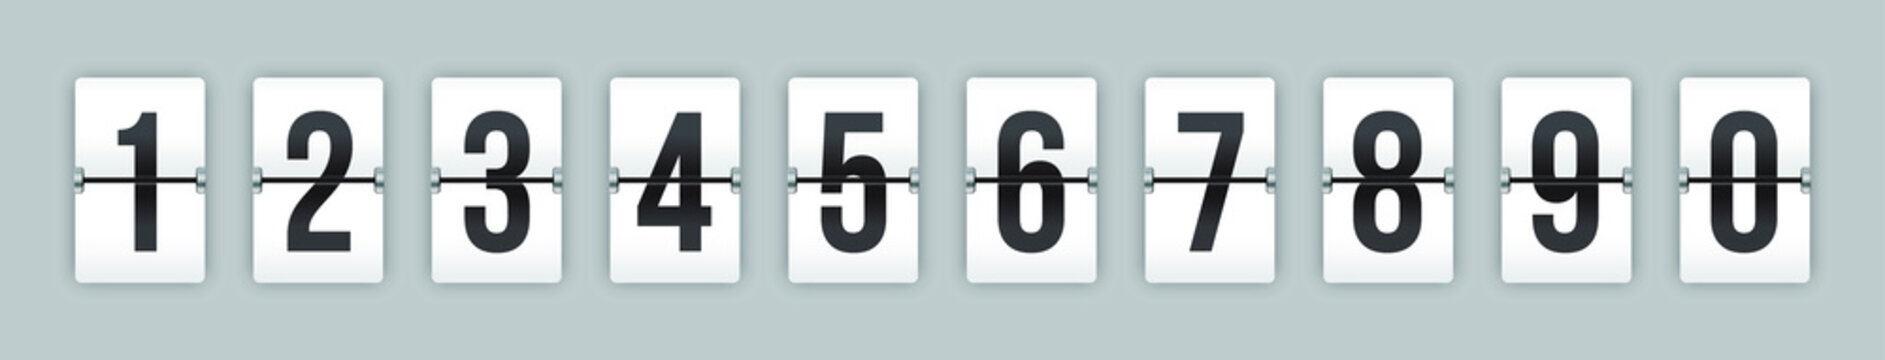 Set of mechanical flip countdown numbers on white background ready to use in your countdown counter, timer, scoreboard, clock design.